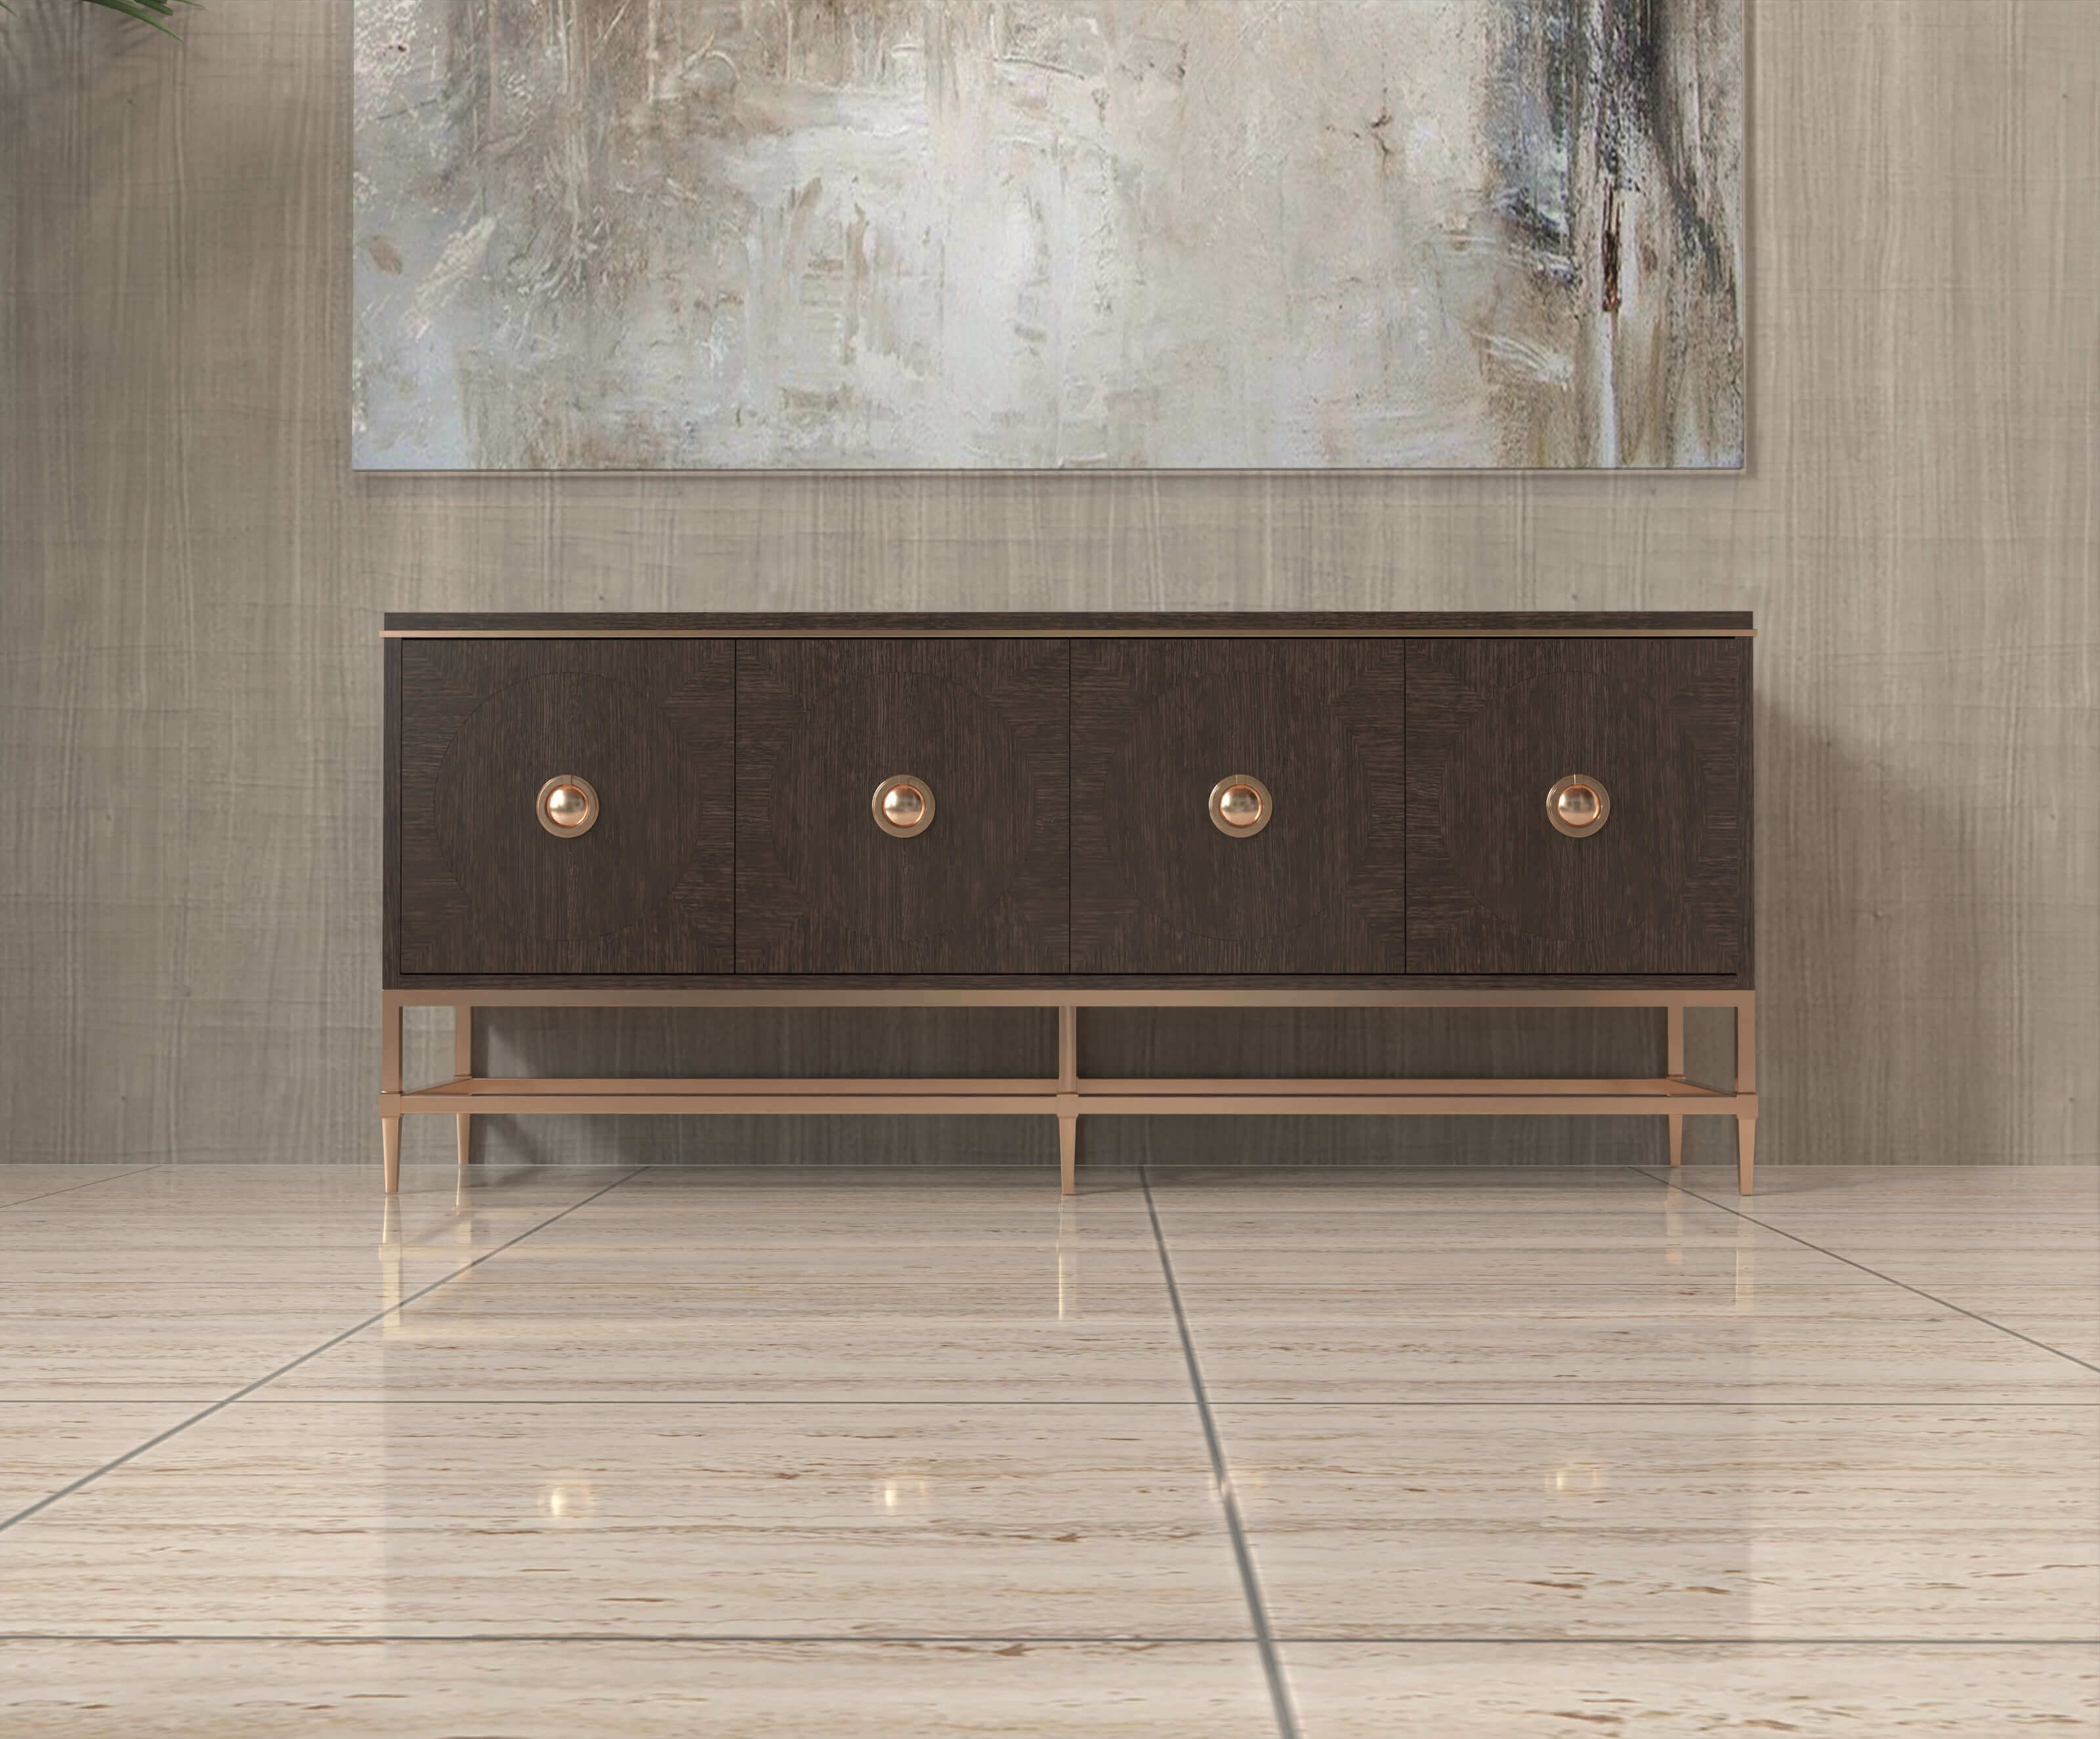 3D rendering of sideboard with gold accents in tiled hallway made with imagine.io